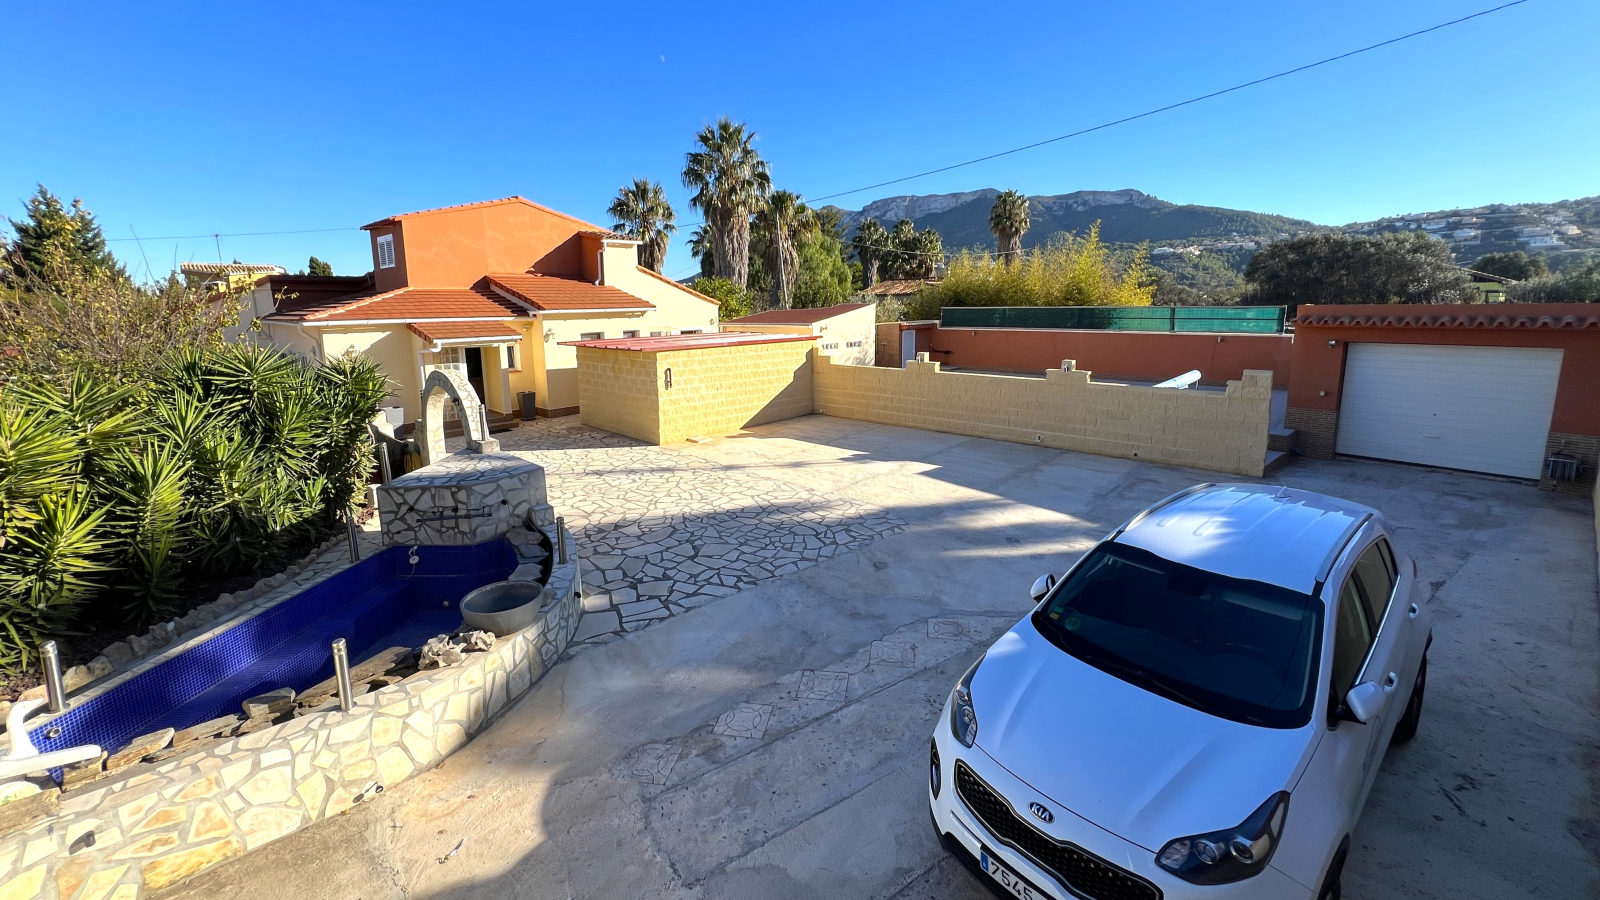 Villa in a quiet location with high technical equipment, heated pool, garage, etc.